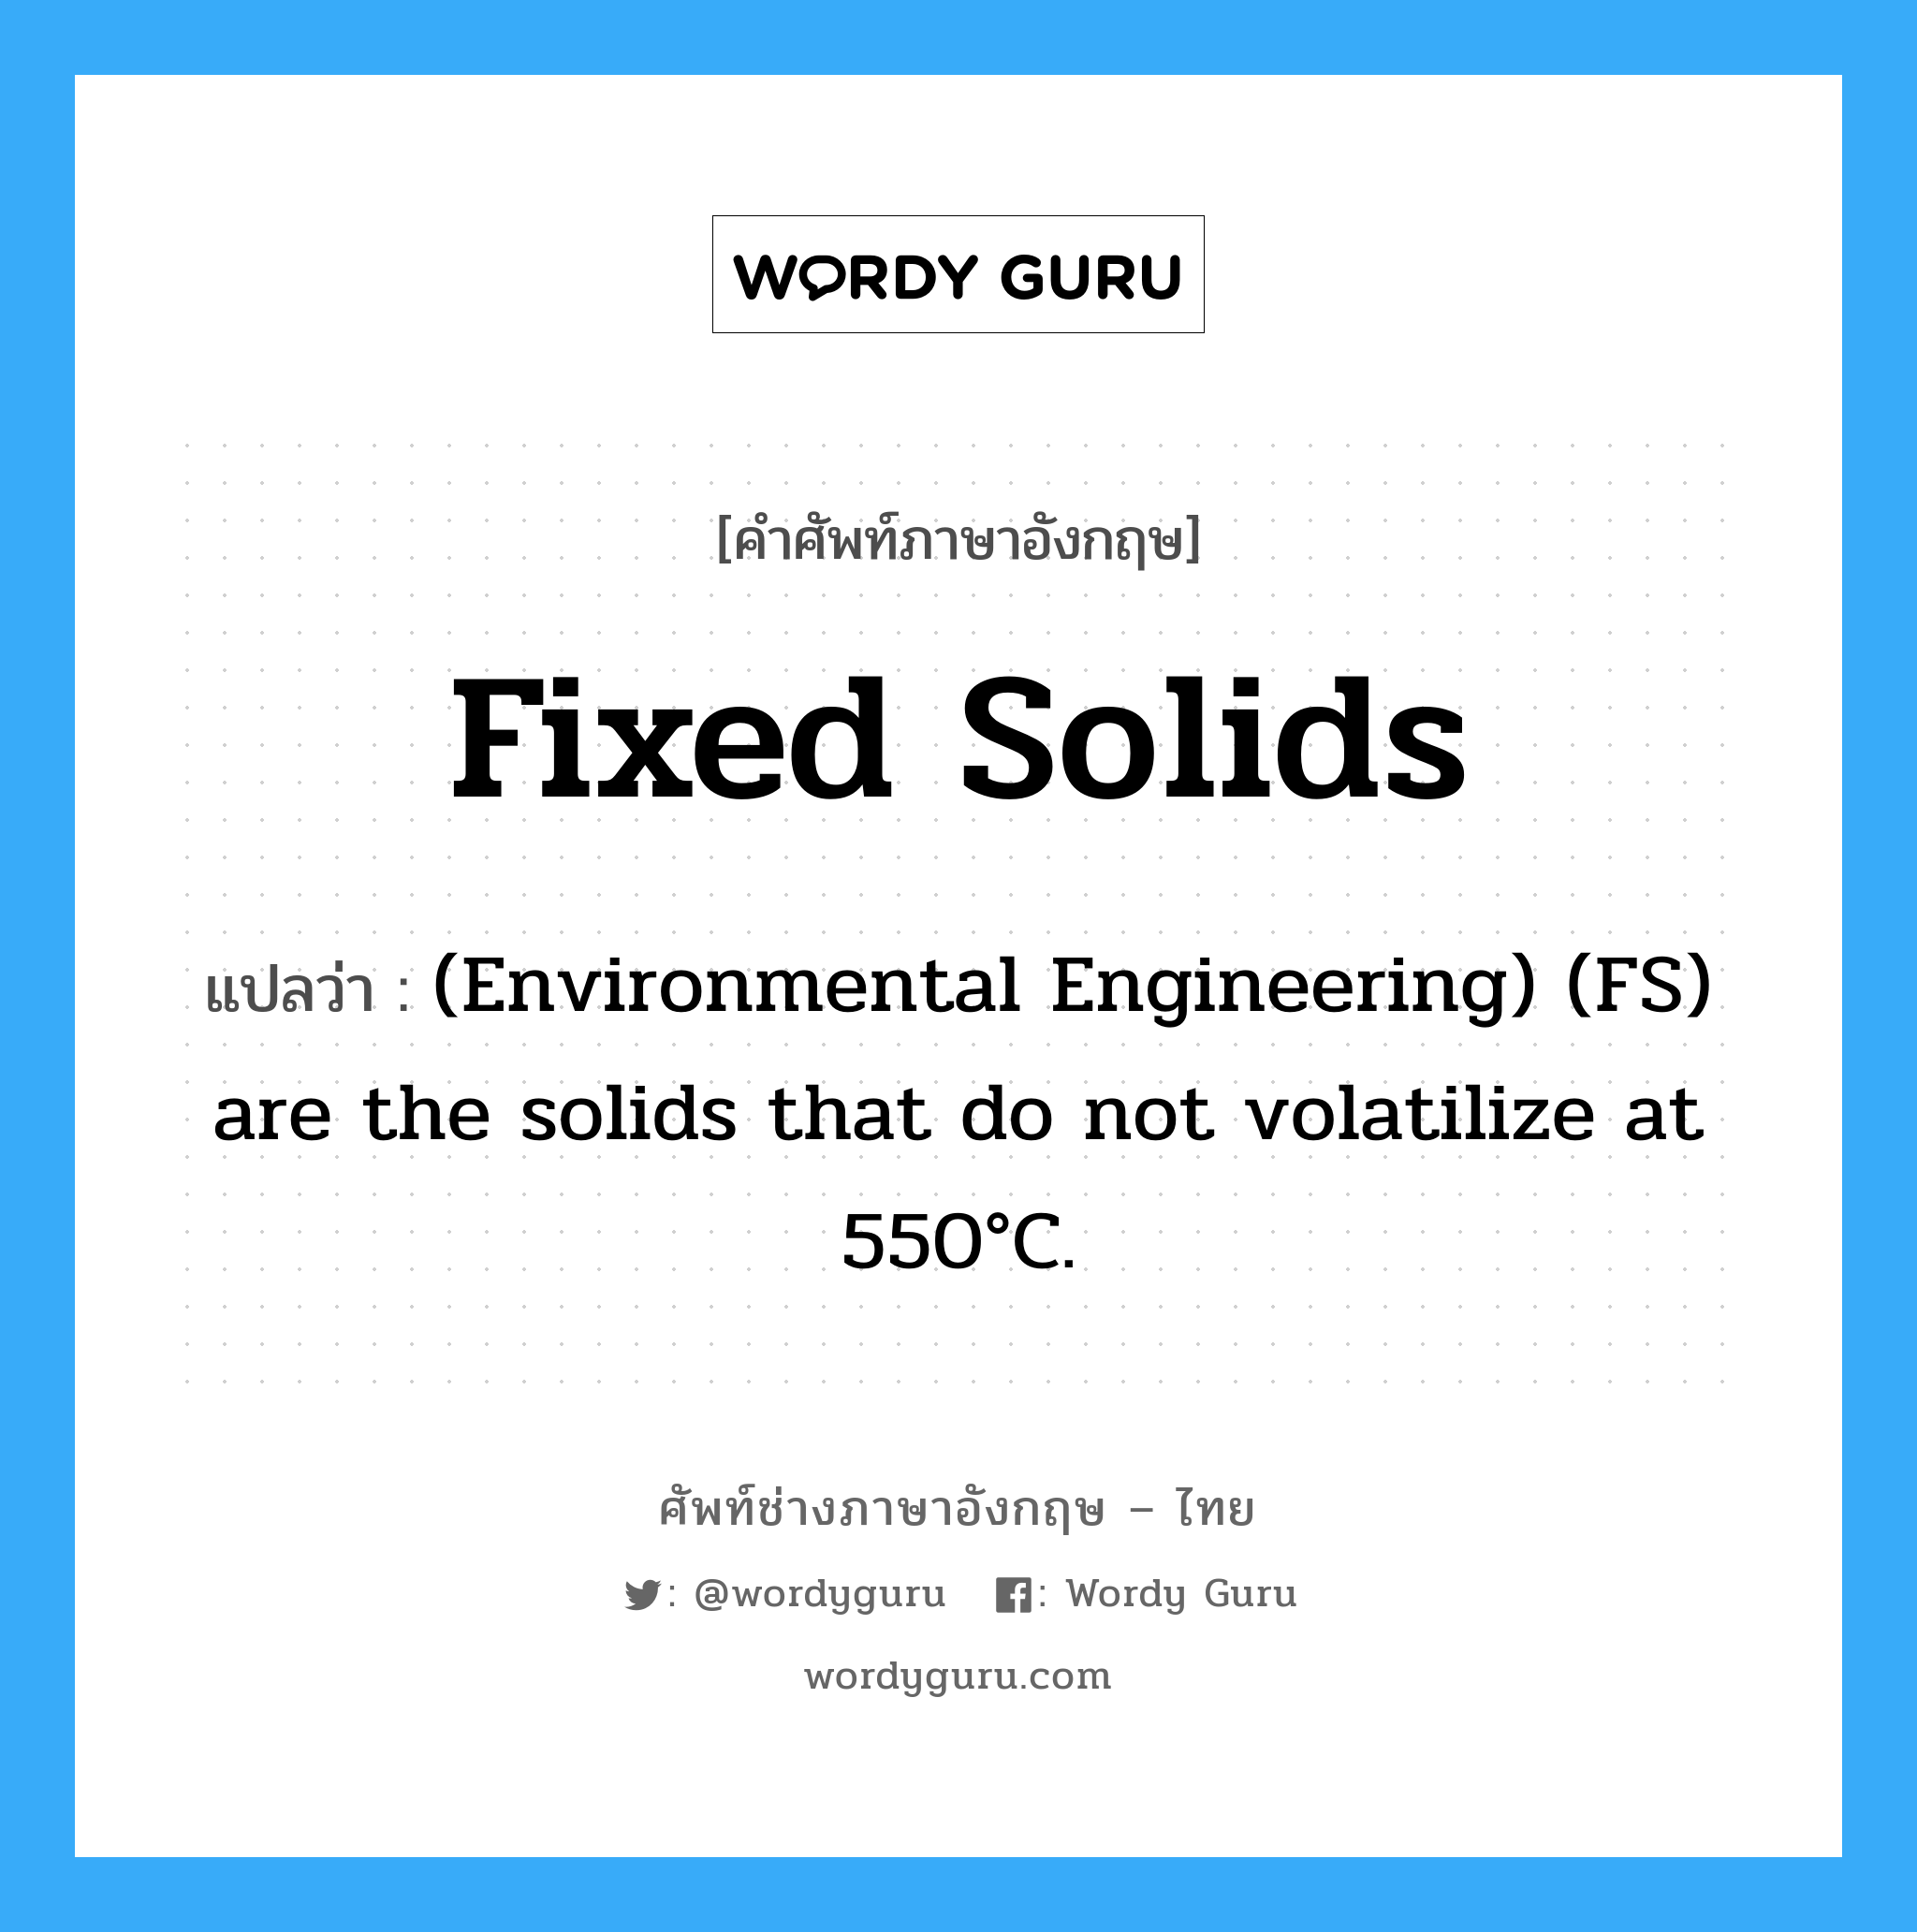 Fixed solids แปลว่า?, คำศัพท์ช่างภาษาอังกฤษ - ไทย Fixed solids คำศัพท์ภาษาอังกฤษ Fixed solids แปลว่า (Environmental Engineering) (FS) are the solids that do not volatilize at 550°C.